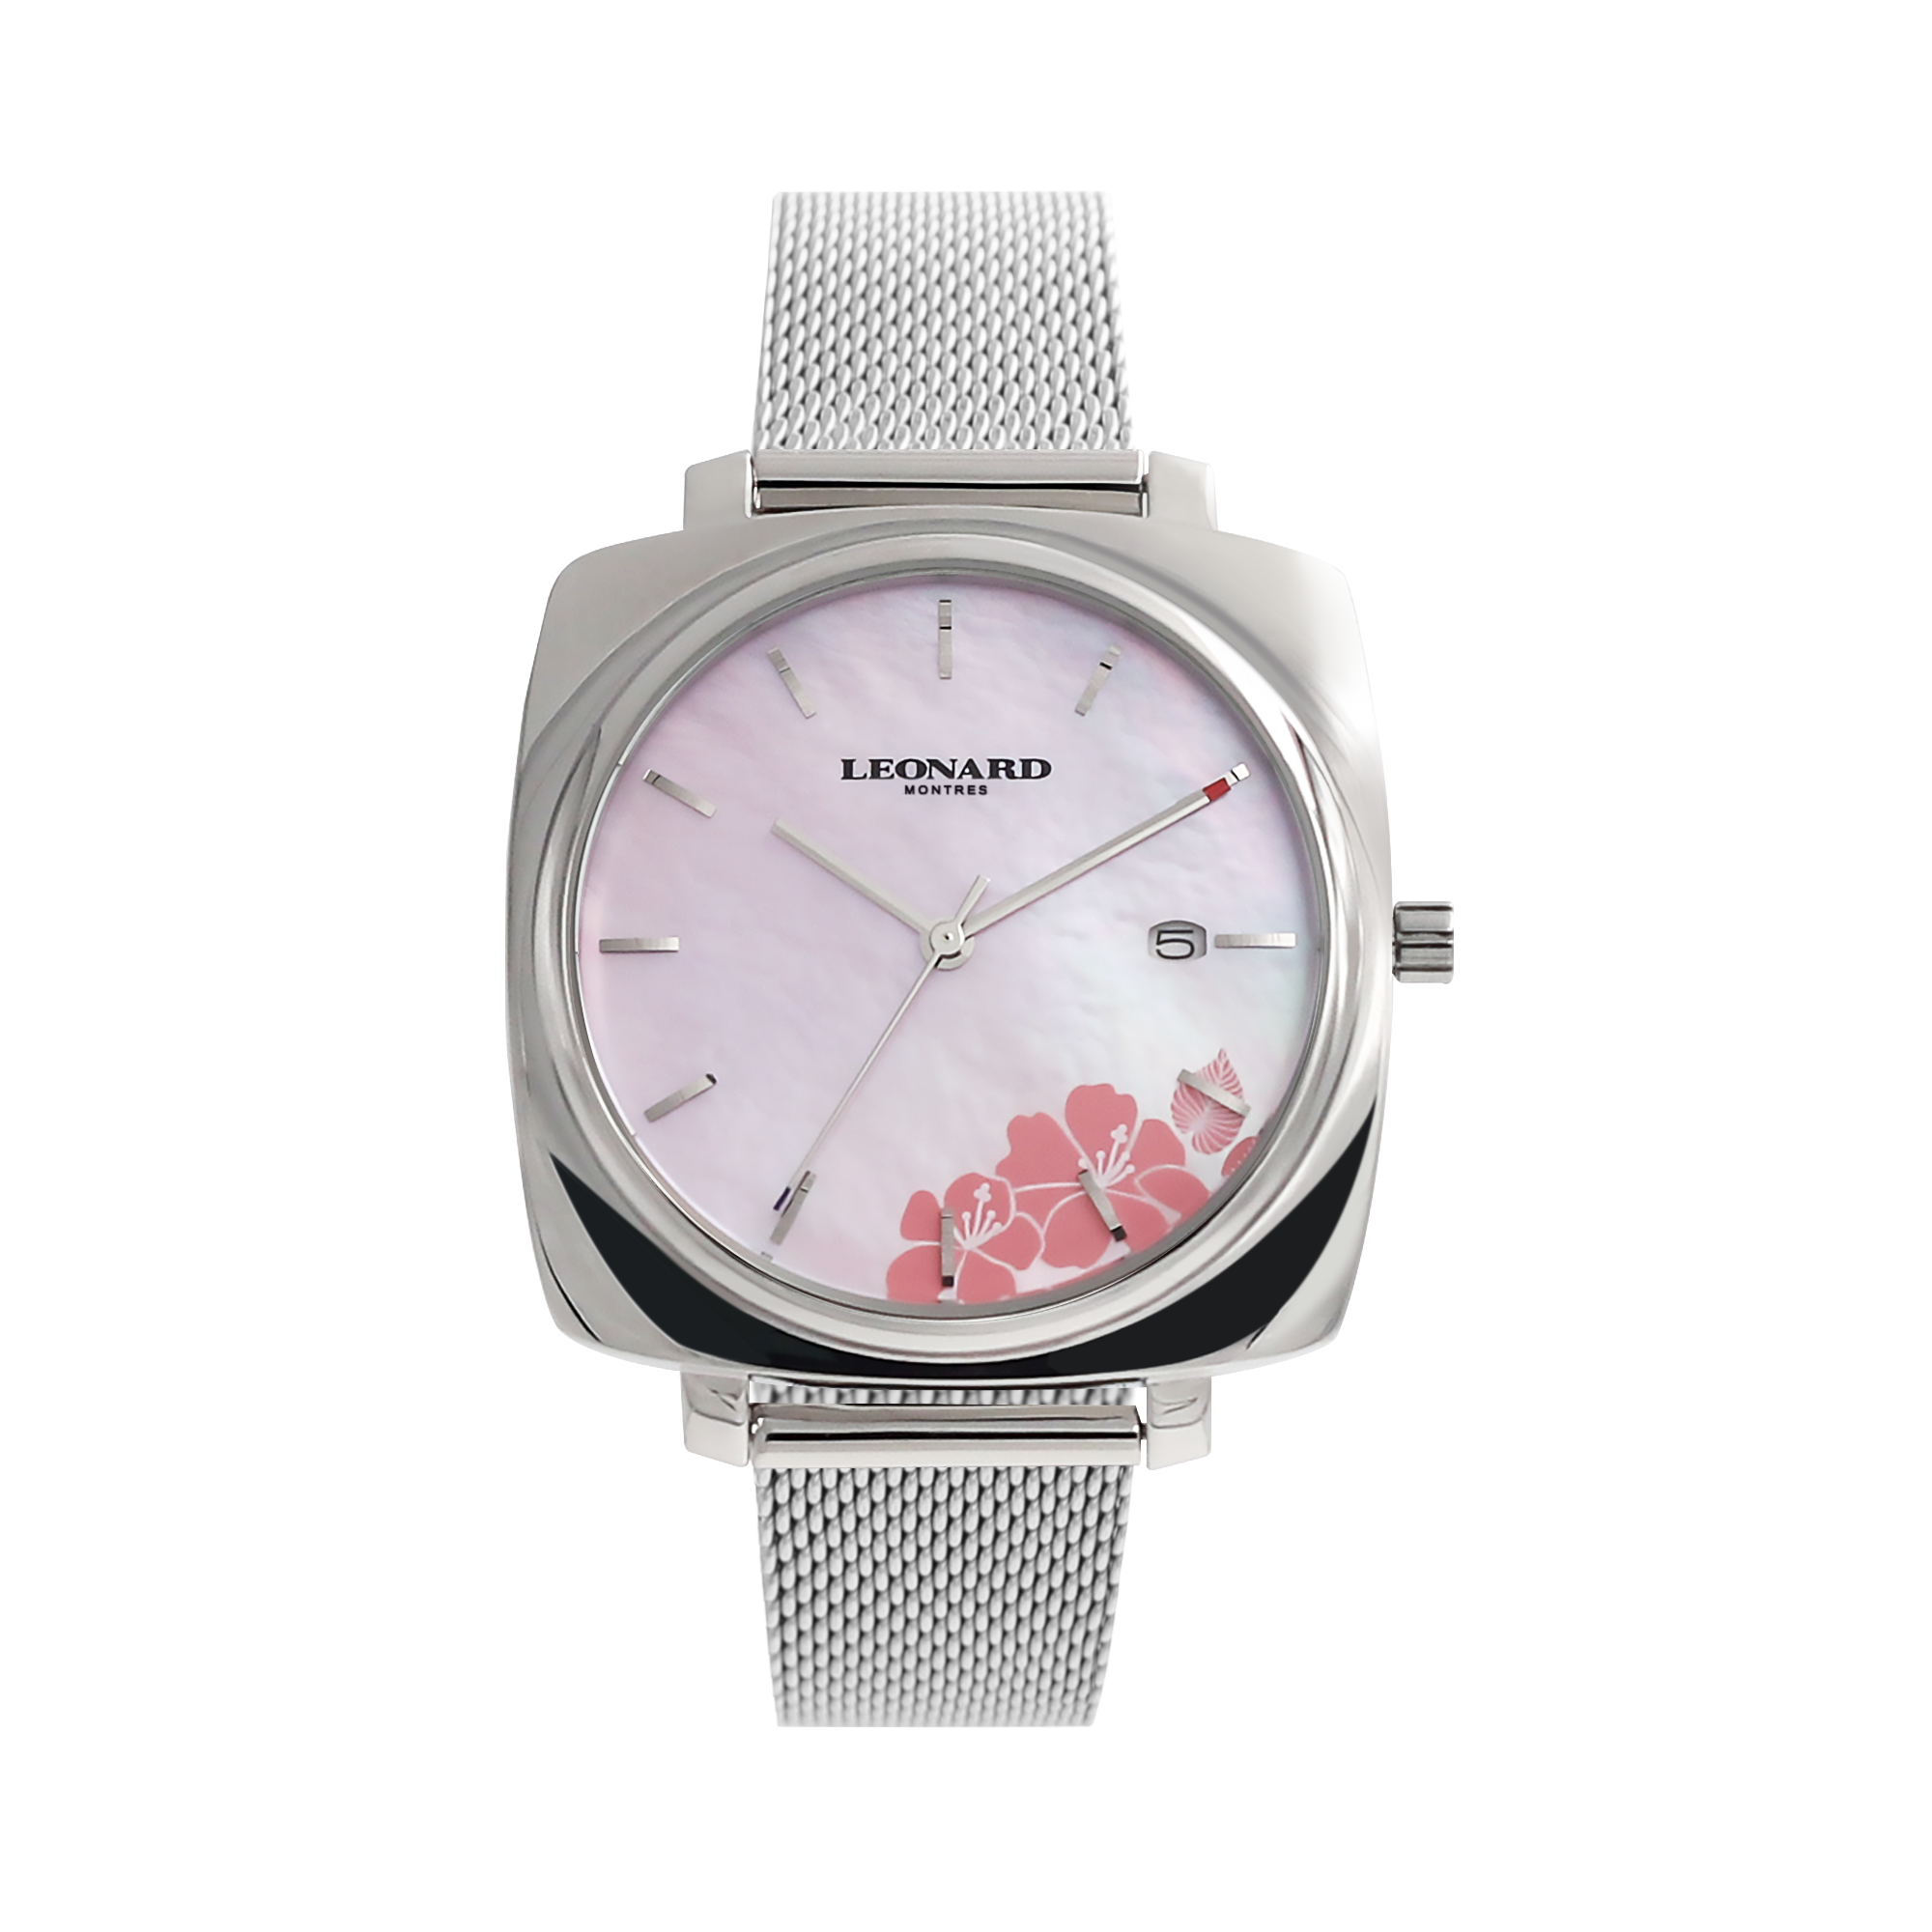 Leonard Montres Swiss 34mm ladies watch white Mother-of-Pearl dial with floral print and crystals